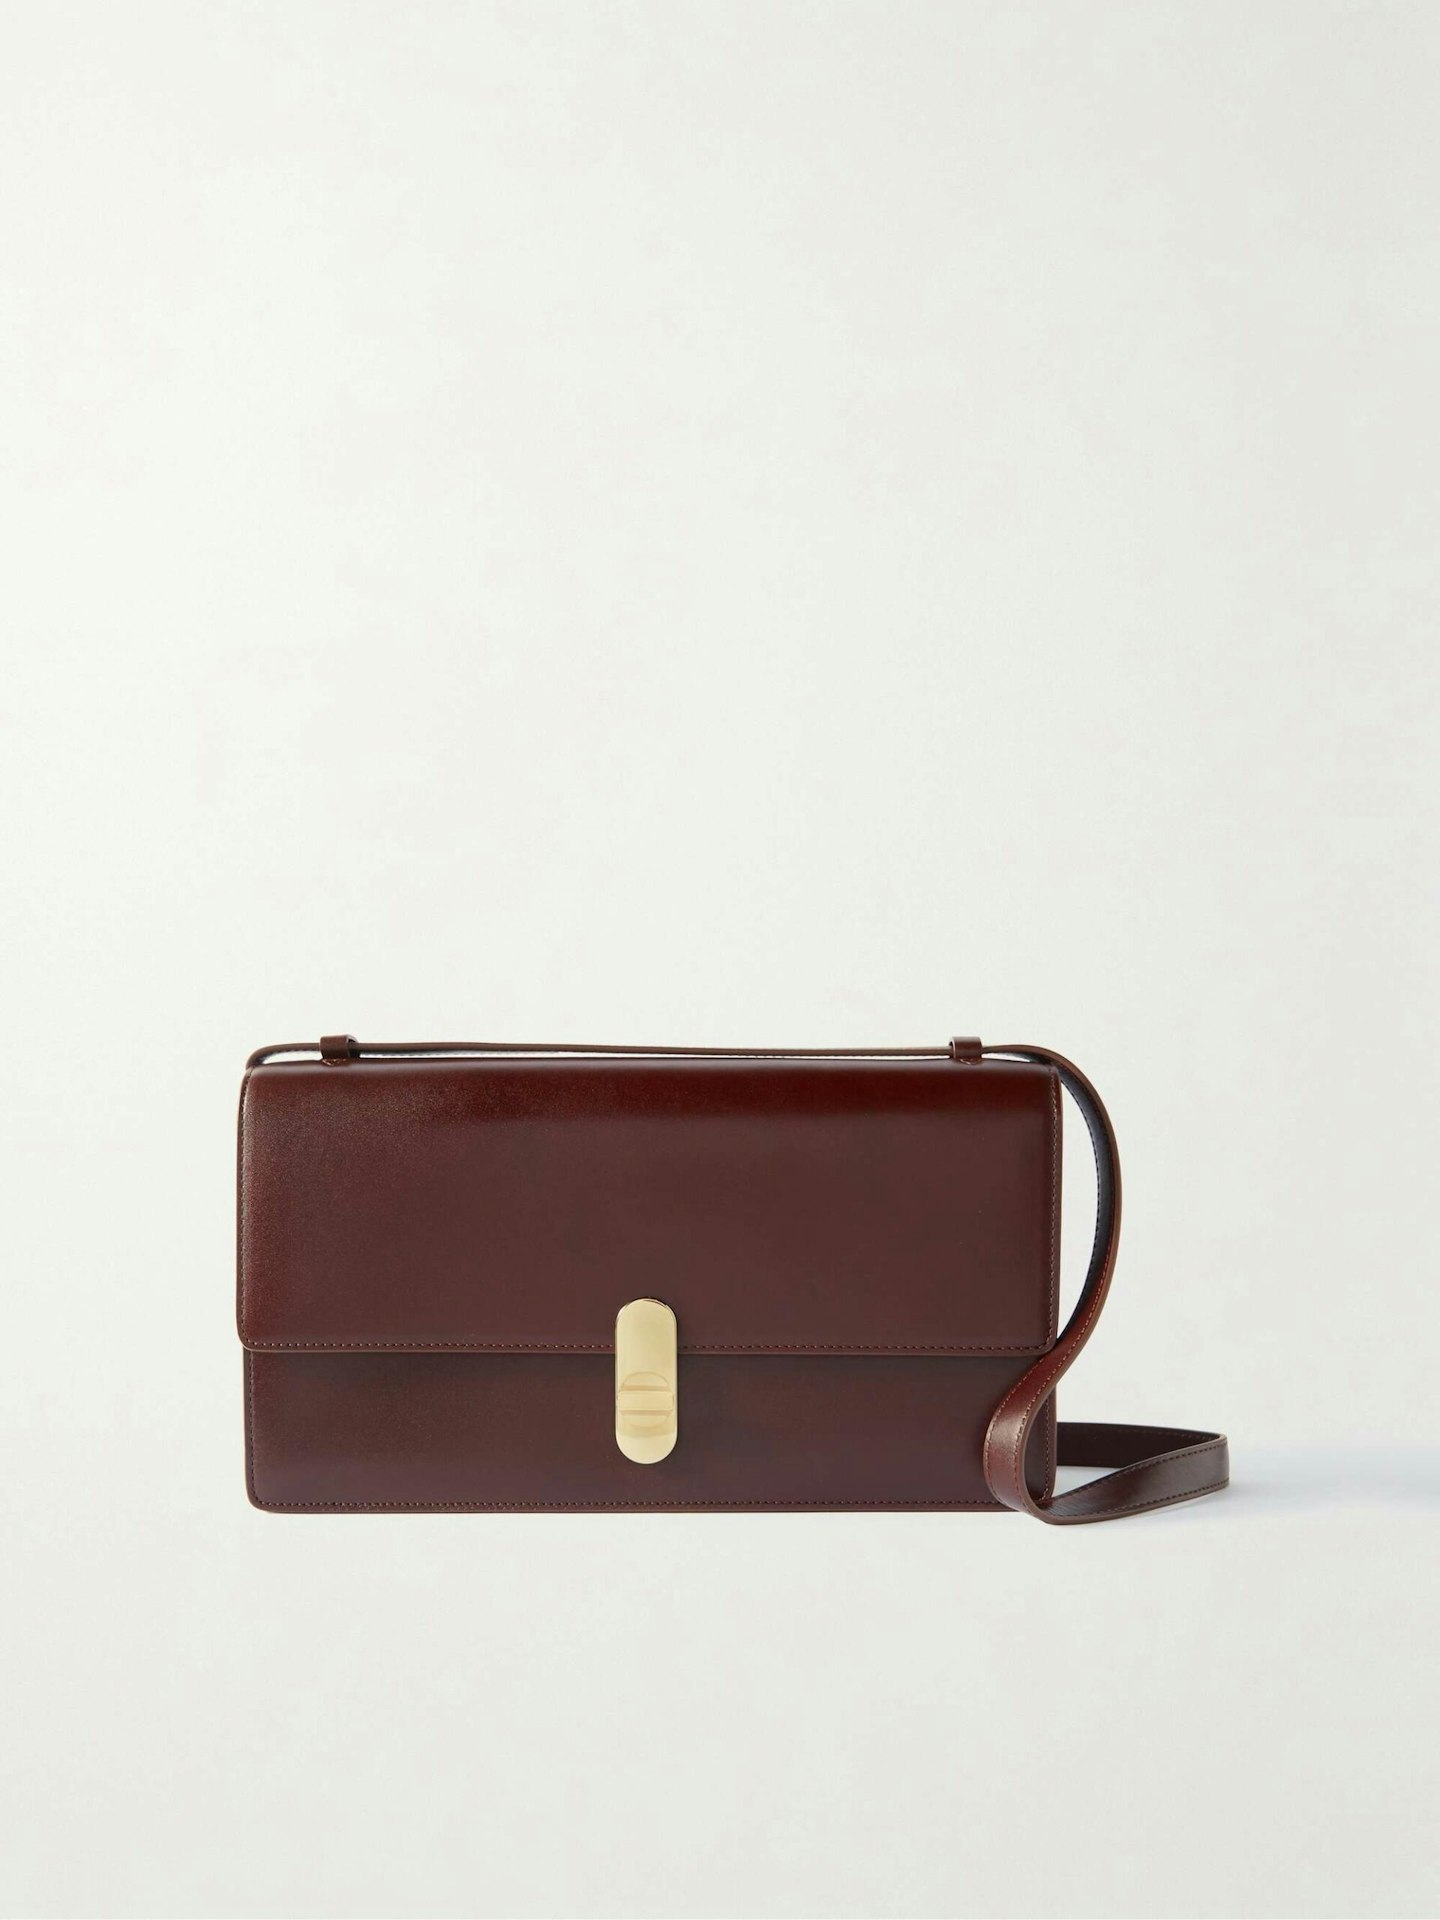 The Row, Clea Leather Shoulder Bag